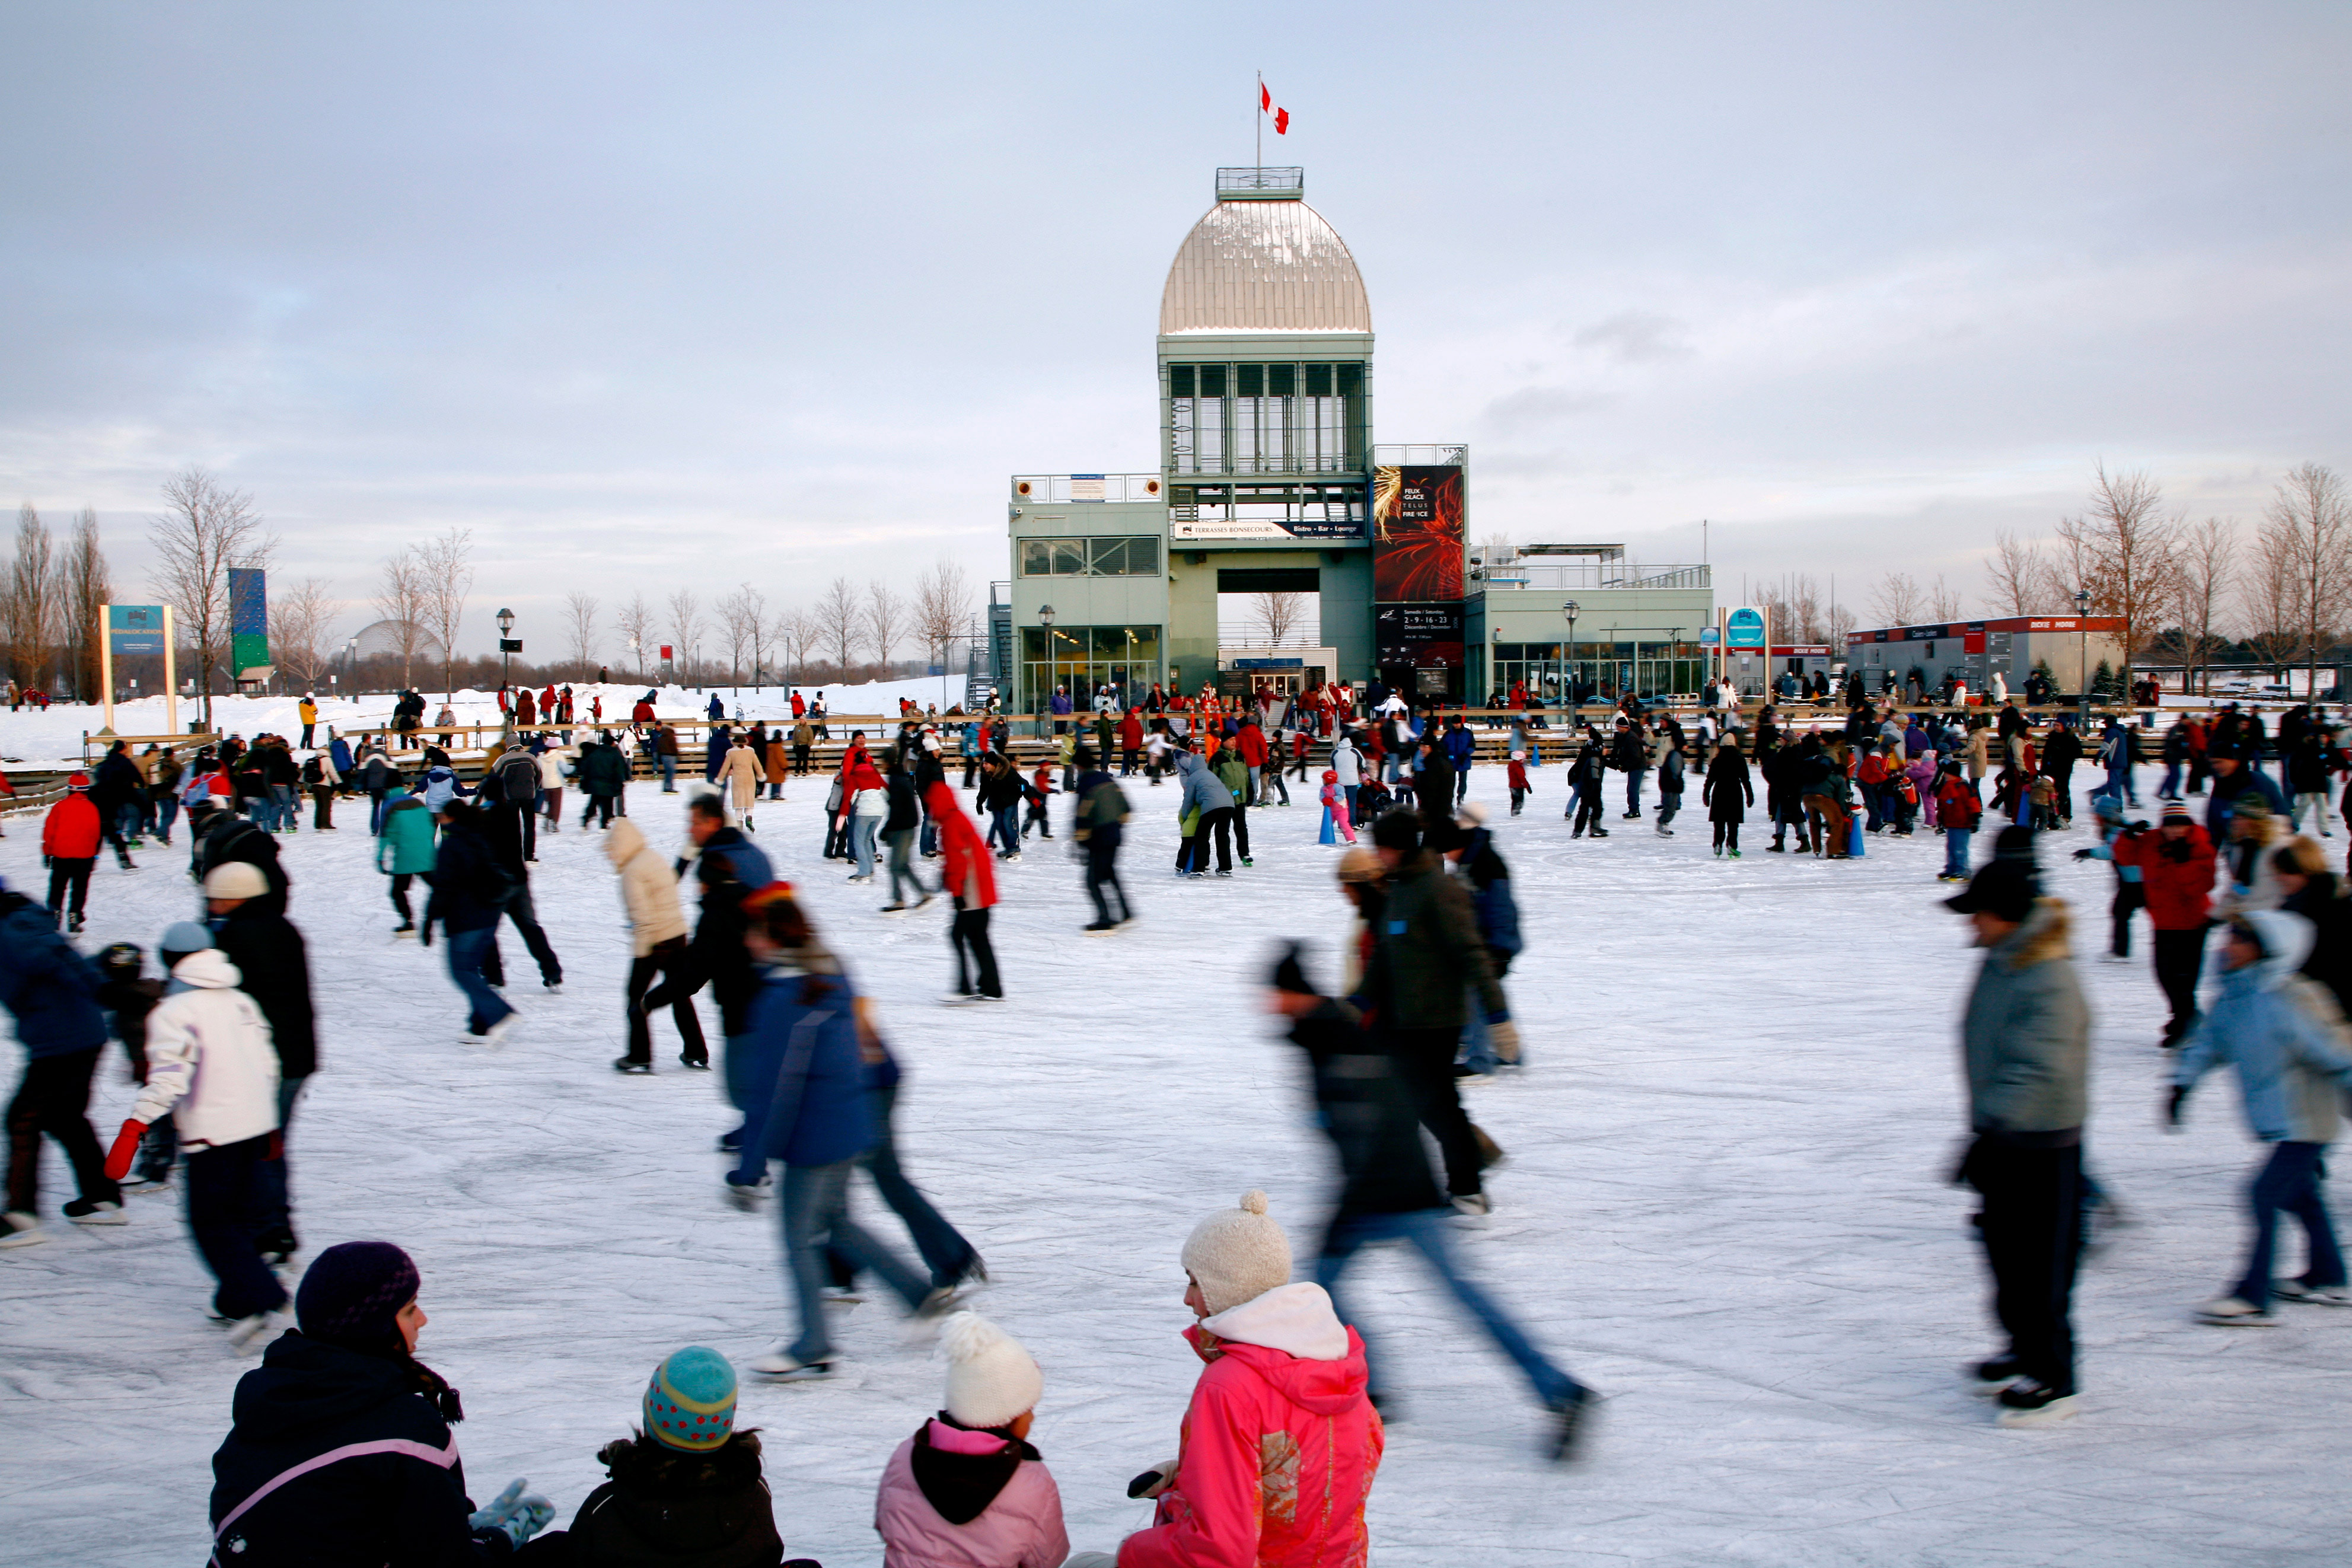 Ice skaters at Parc du Bassin Bonsecours. Image by Brian D Cruickshank / Getty